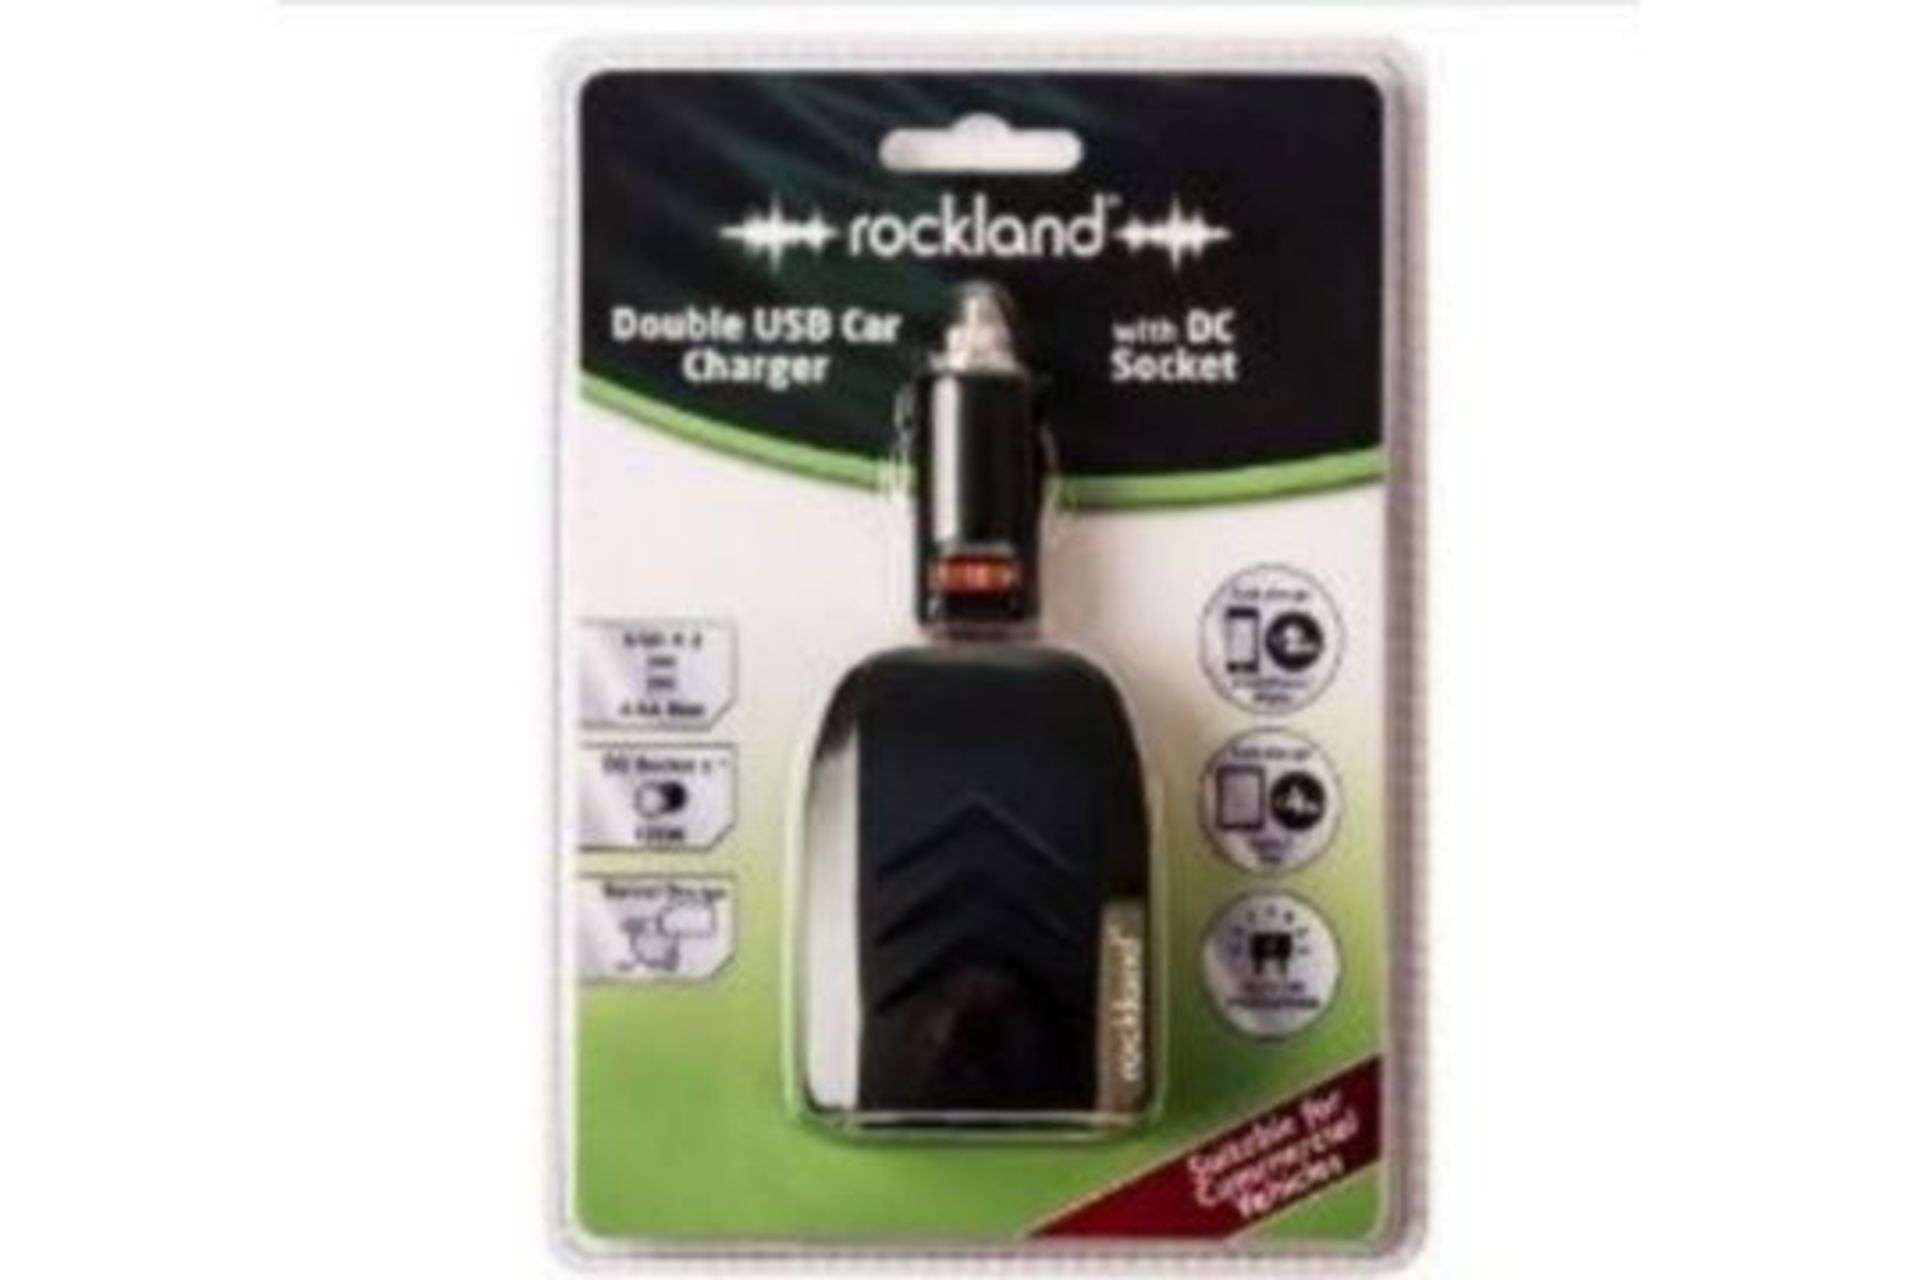 64 X BRAND NEW ROCKLAND DOUBLE USB CHARGER WITH DC SOCKET R4